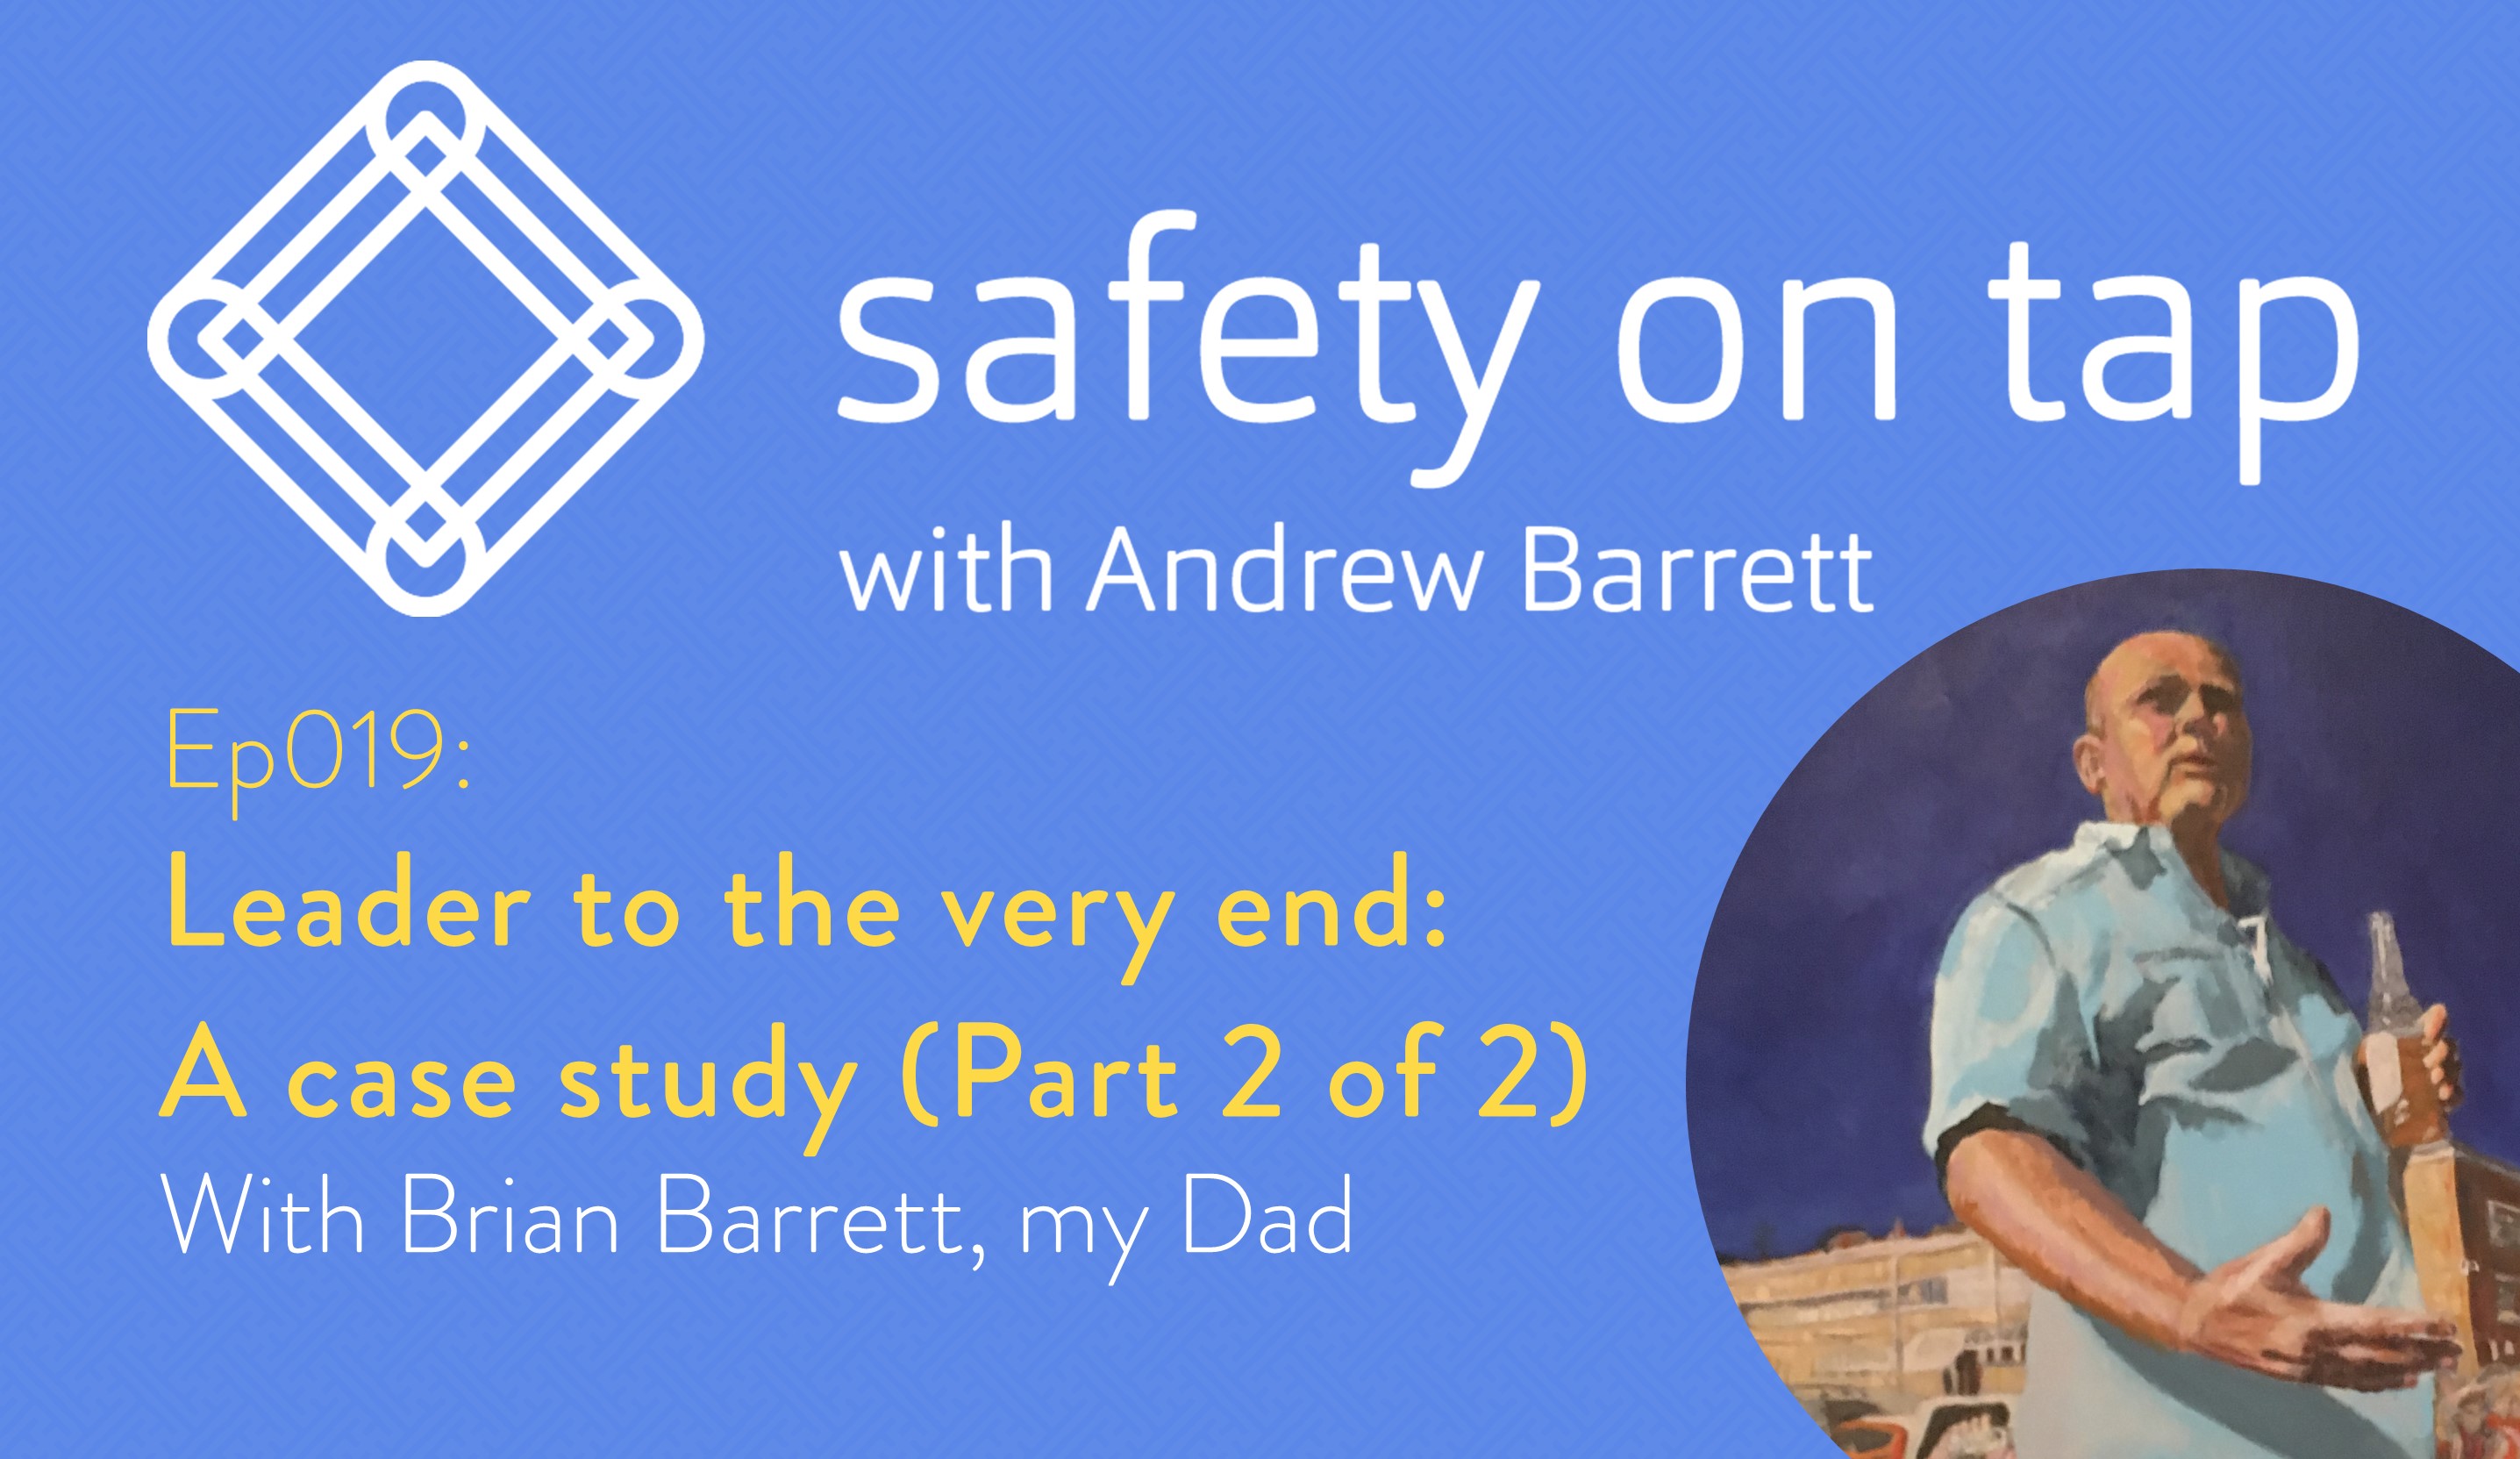 Ep019: Leader to the very end: A case study (Part 2 of 2) with Brian Barrett, my Dad